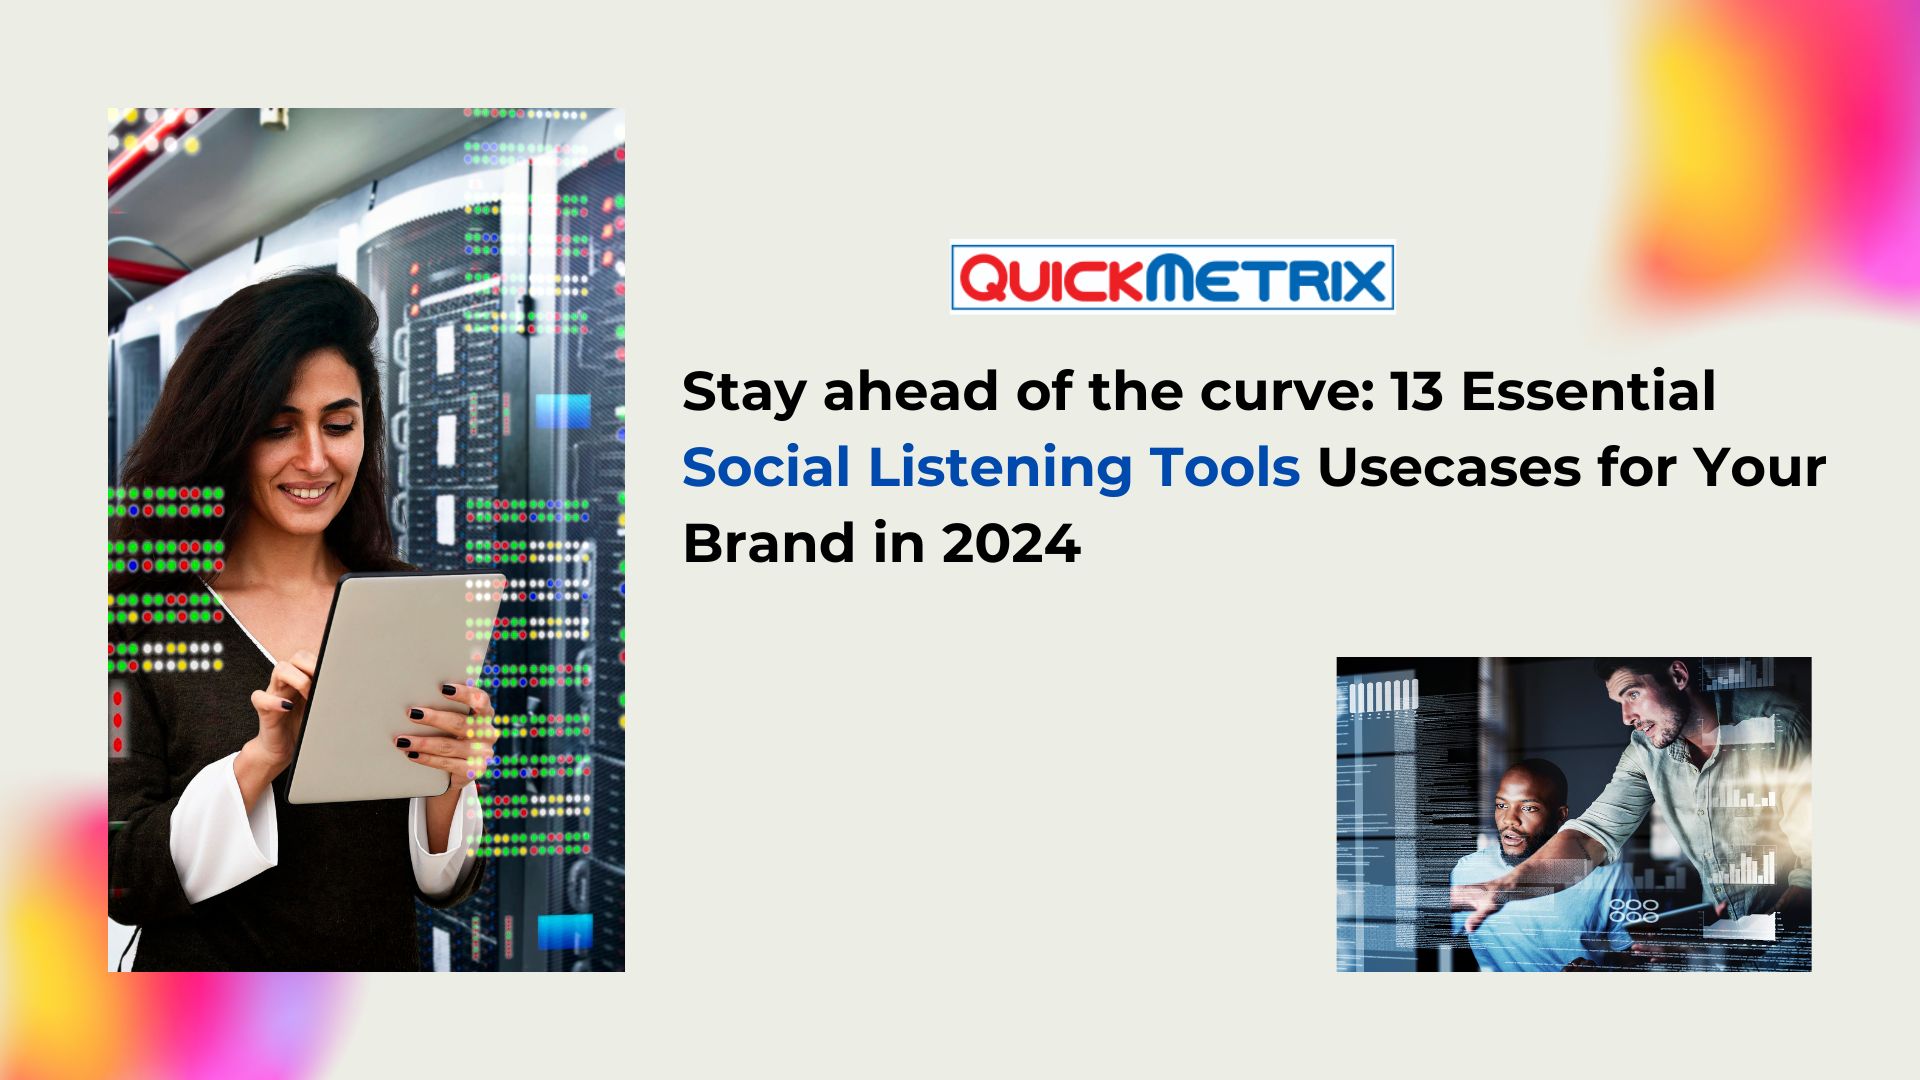 Stay ahead of the curve: 13 Essential Social Listening Tools Usecases for Your Brand in 2024